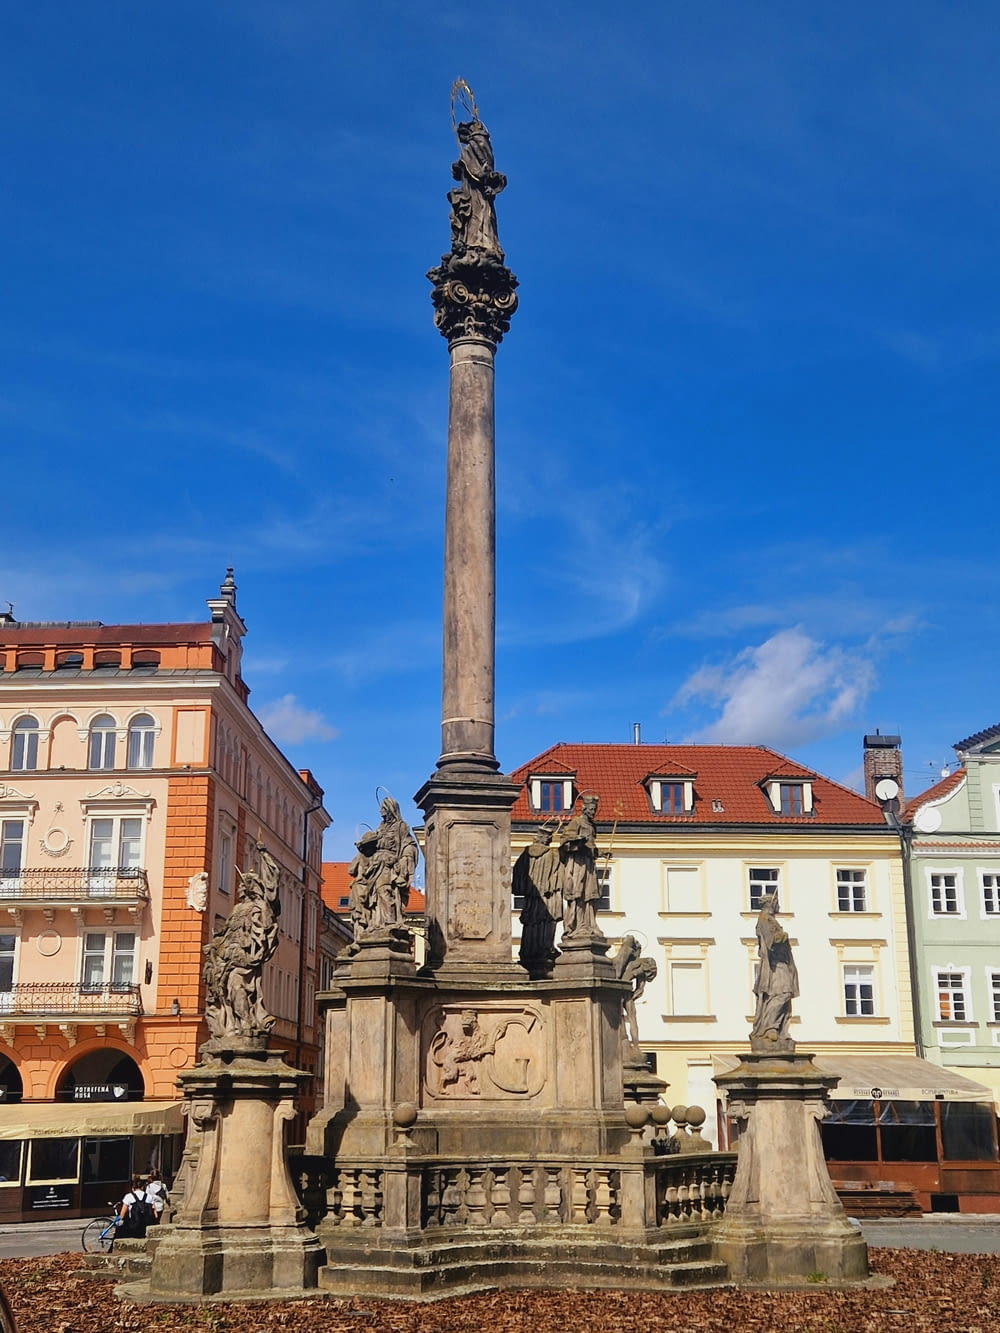 a statue in the middle of a city square